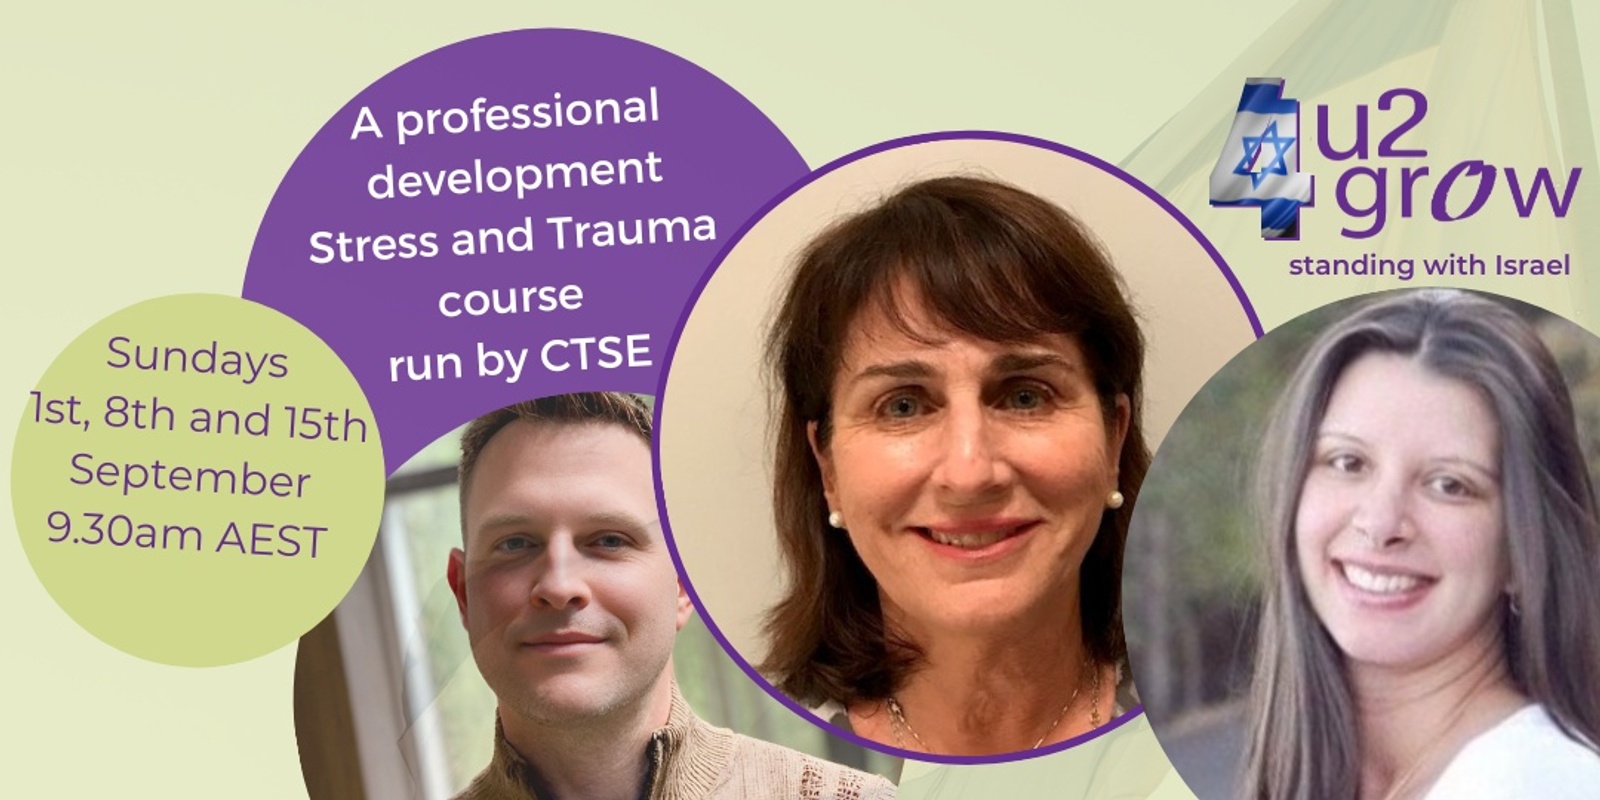 Banner image for 4u2gr0w and CTSE's Stress and Trauma Education Program